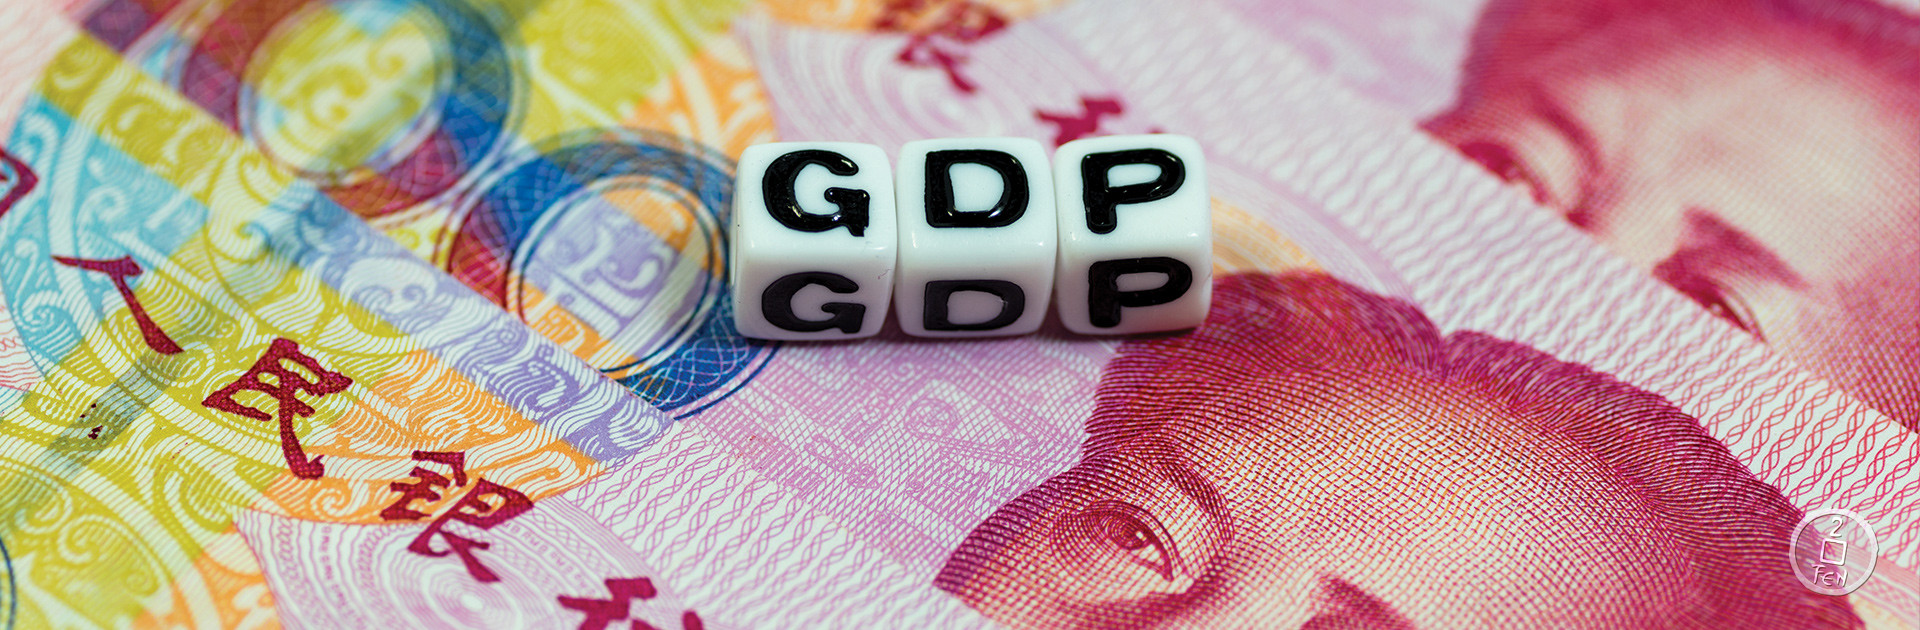 The Tax Problem at the Heart of China’s “GDPism”